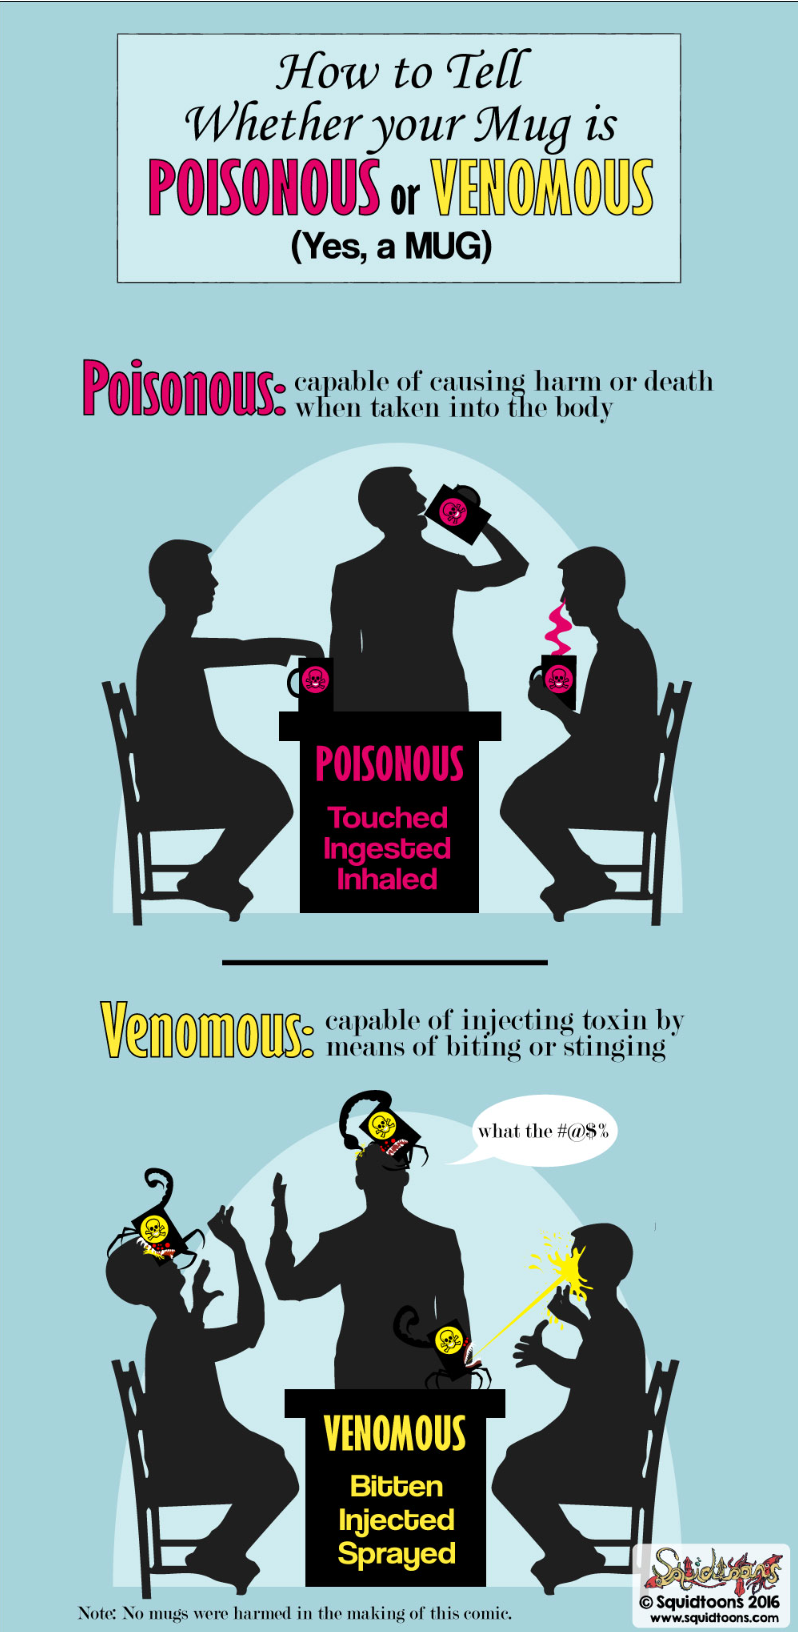 "How To Tell Whether Your Mug Is Poisonous or Venomous" (Squidtoons).